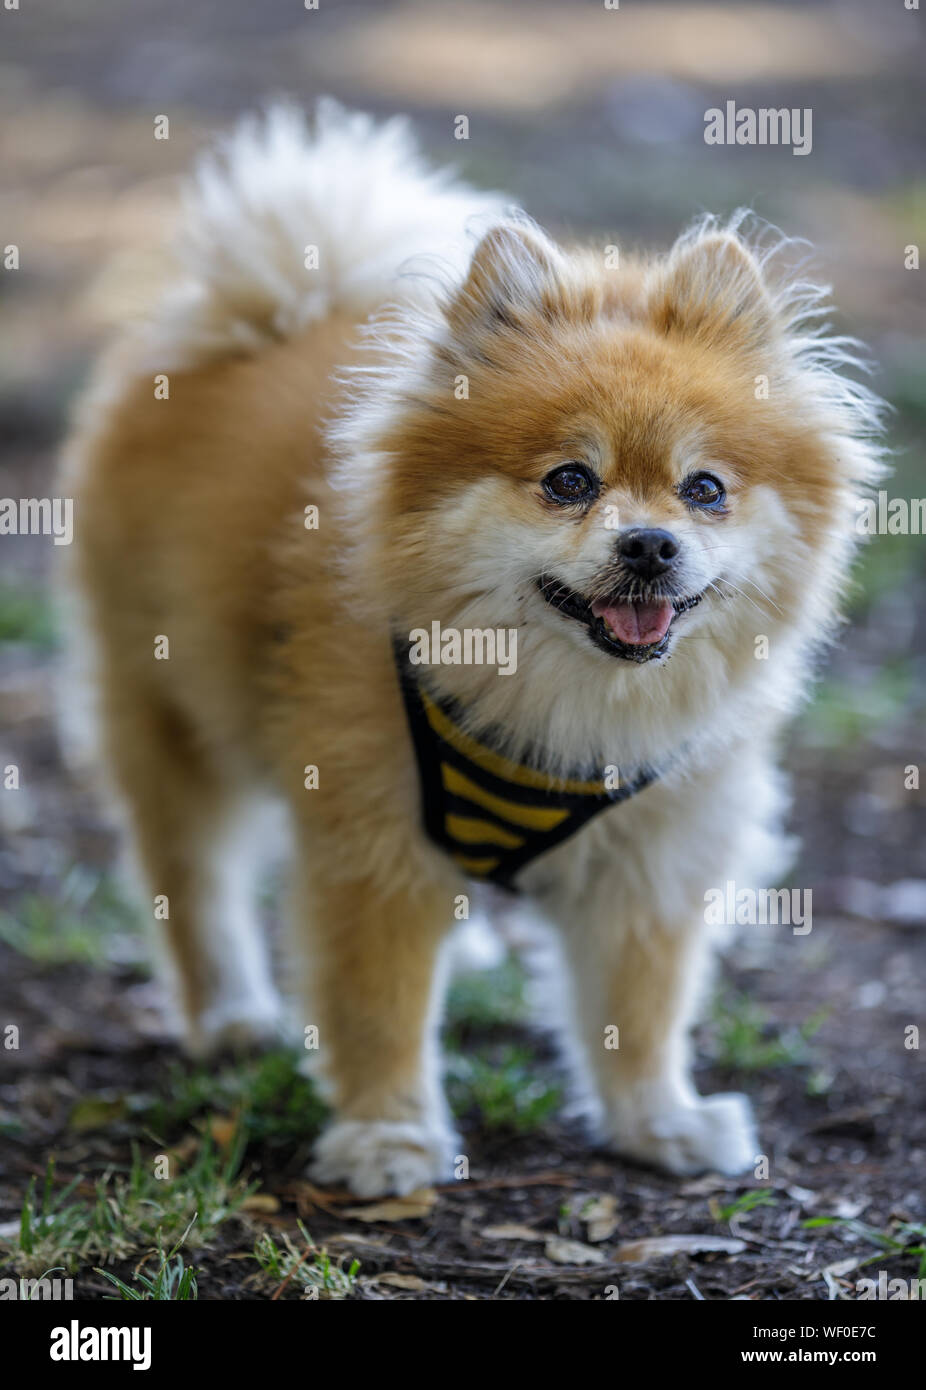 Adult Male Brown and White Pomeranian Portrait Stock Photo